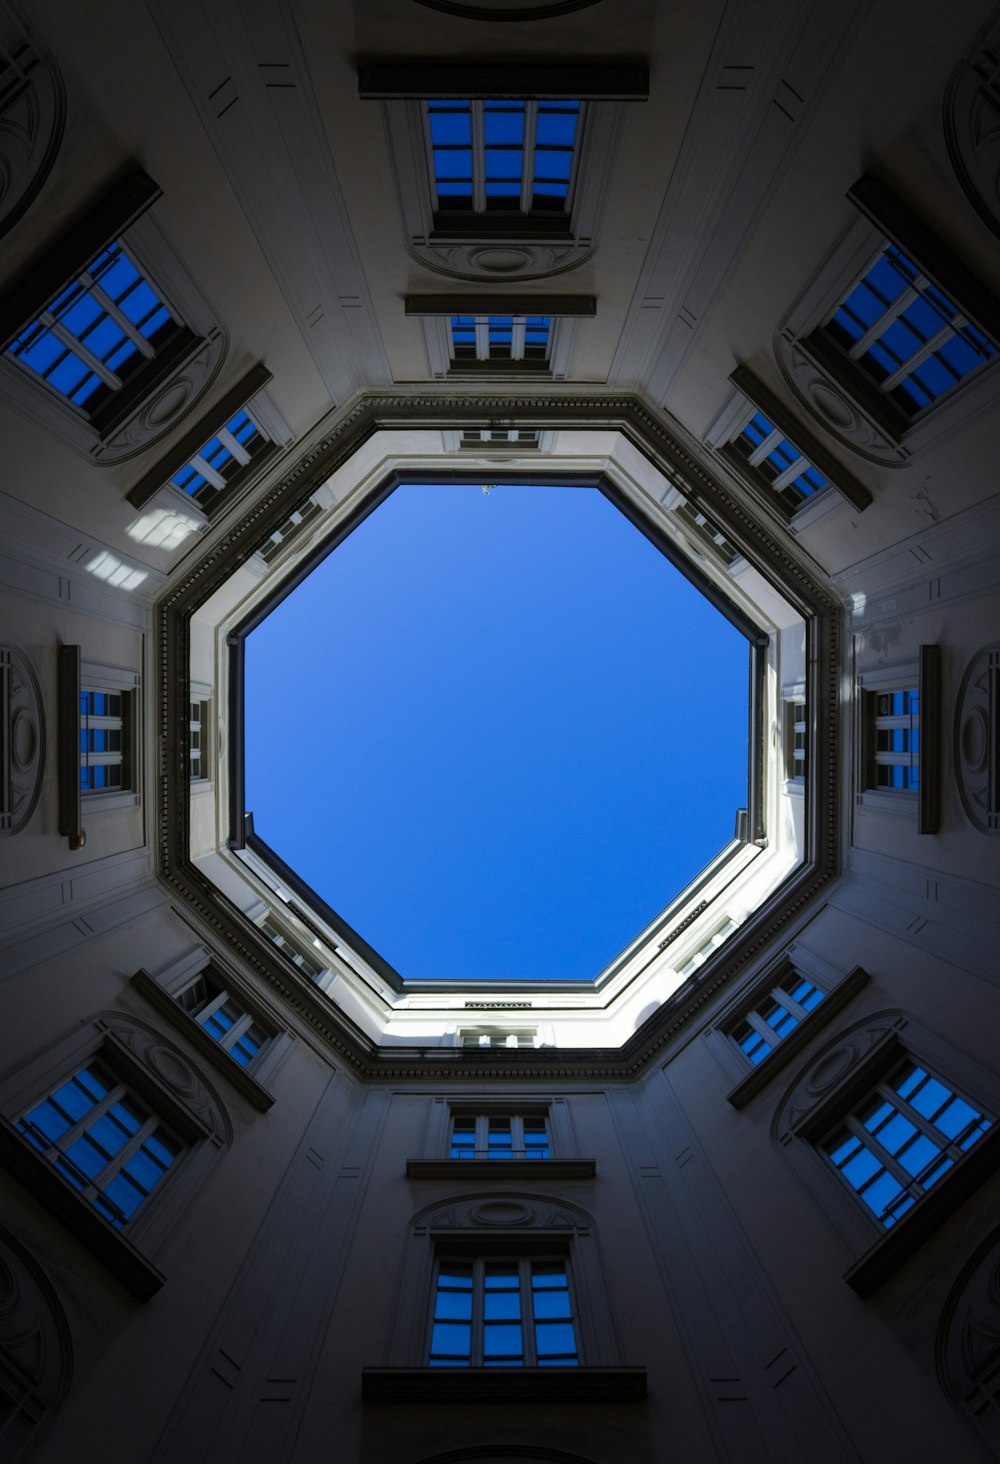 a view looking up at the ceiling of a building